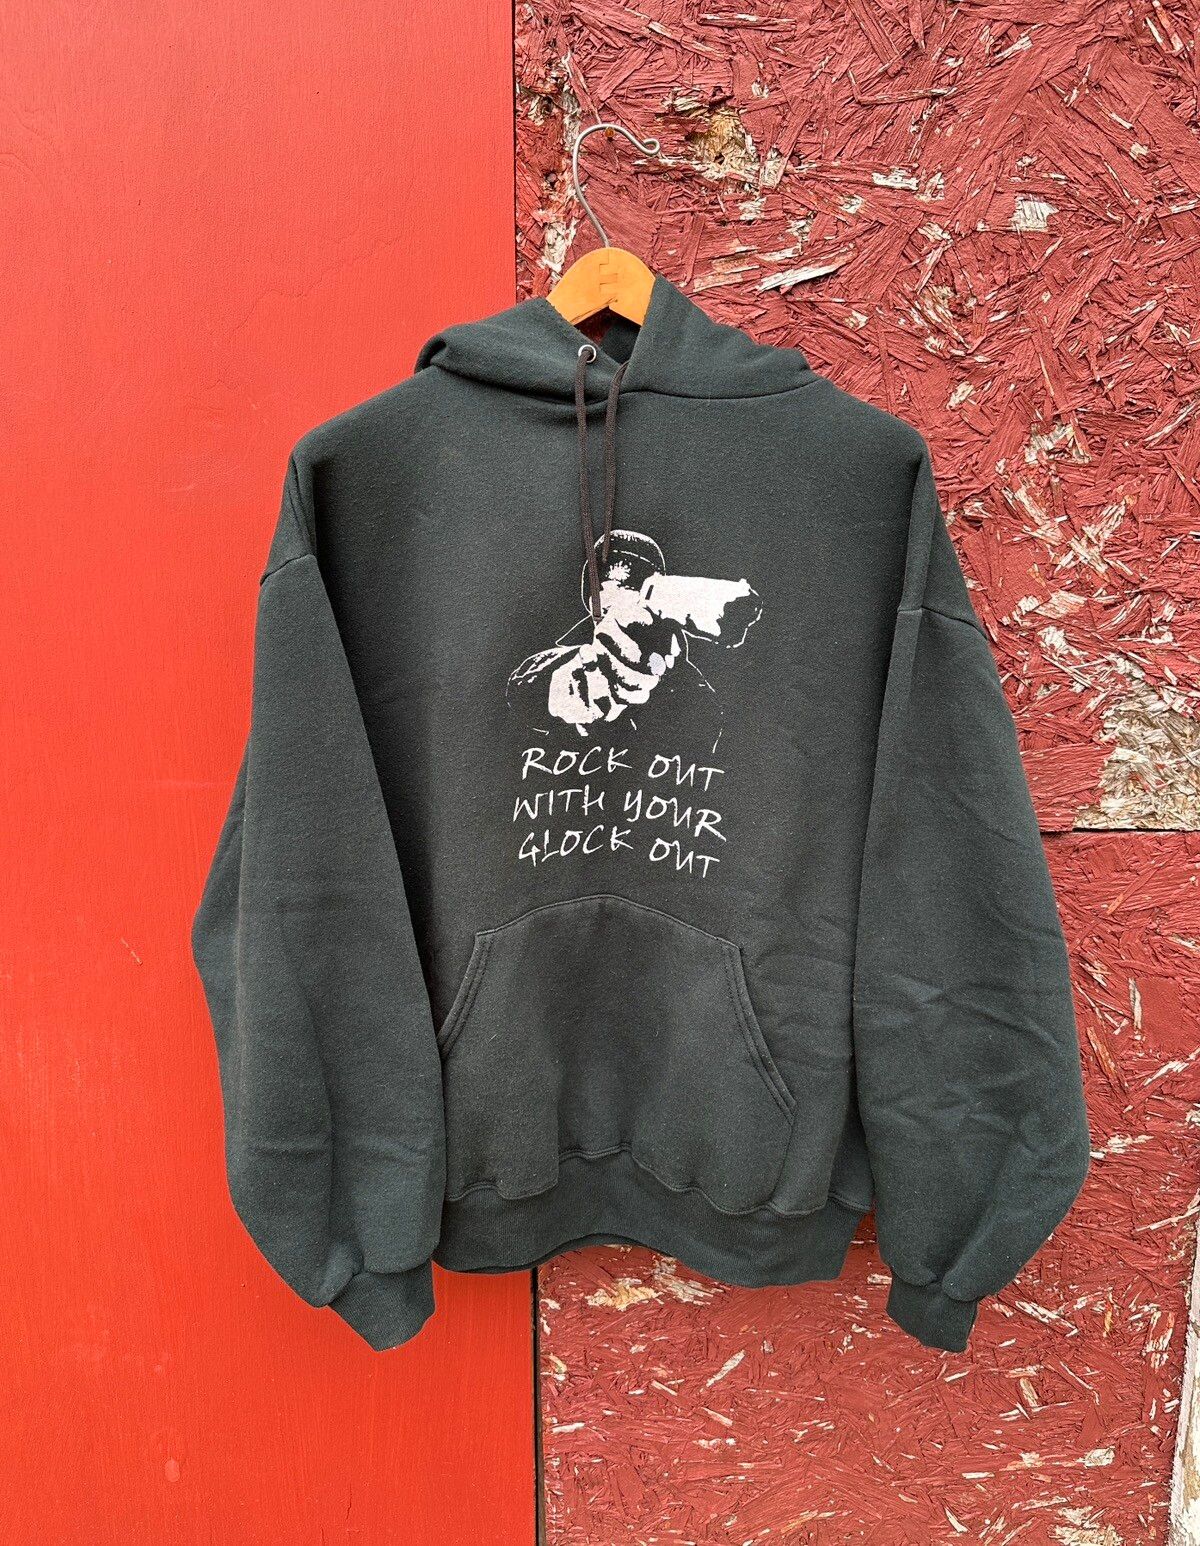 Vintage 2000s Rock Out with your Glock Out Hoodie Sweatshirt Size US L / EU 52-54 / 3 - 1 Preview